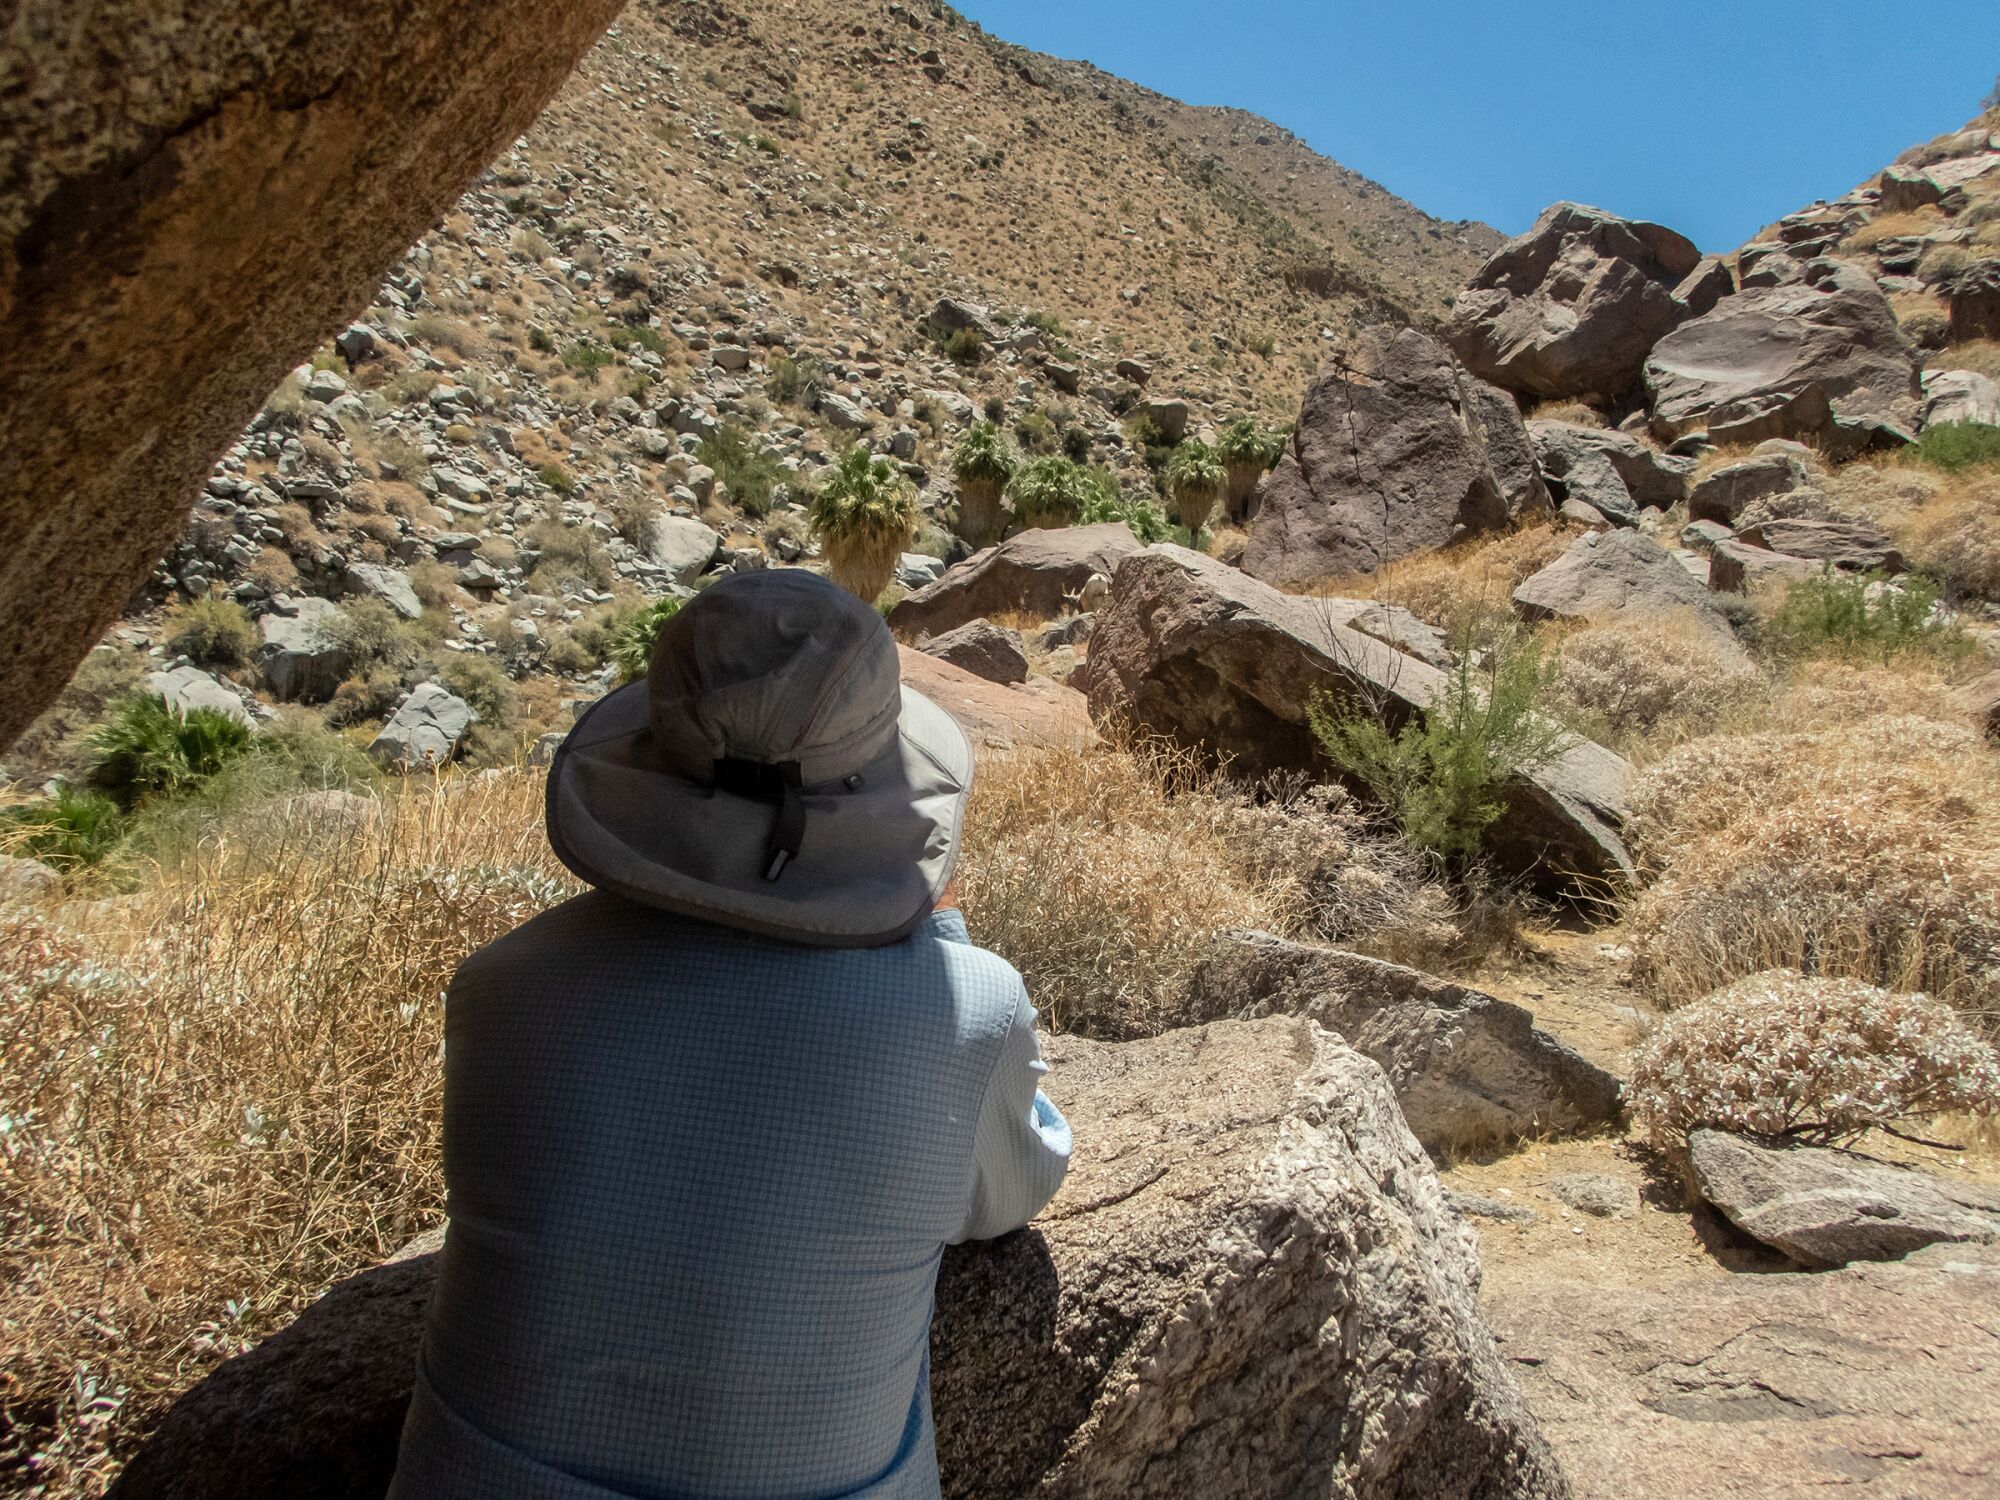 Phillip Roullard sits in the shade of a rock looking at the desert landscape of rocks and scrub.